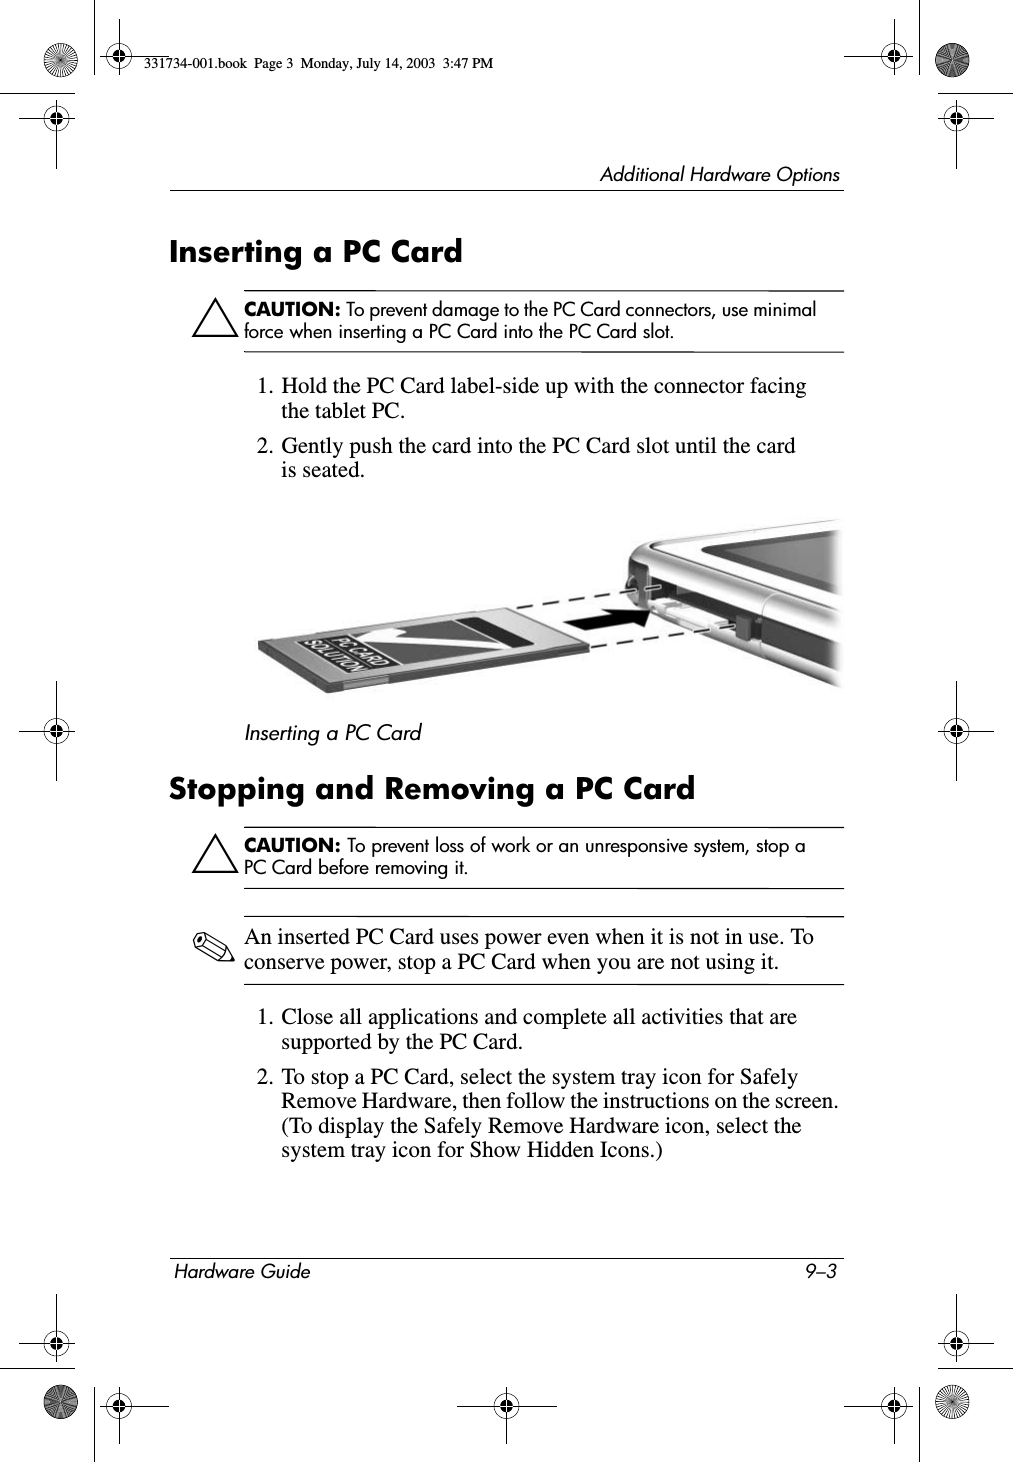 Additional Hardware OptionsHardware Guide 9–3Inserting a PC CardÄCAUTION: To prevent damage to the PC Card connectors, use minimal force when inserting a PC Card into the PC Card slot.1. Hold the PC Card label-side up with the connector facing the tablet PC.2. Gently push the card into the PC Card slot until the card is seated.Inserting a PC CardStopping and Removing a PC CardÄCAUTION: To prevent loss of work or an unresponsive system, stop a PC Card before removing it.✎An inserted PC Card uses power even when it is not in use. To conserve power, stop a PC Card when you are not using it.1. Close all applications and complete all activities that are supported by the PC Card.2. To stop a PC Card, select the system tray icon for Safely Remove Hardware, then follow the instructions on the screen. (To display the Safely Remove Hardware icon, select the system tray icon for Show Hidden Icons.)331734-001.book  Page 3  Monday, July 14, 2003  3:47 PM